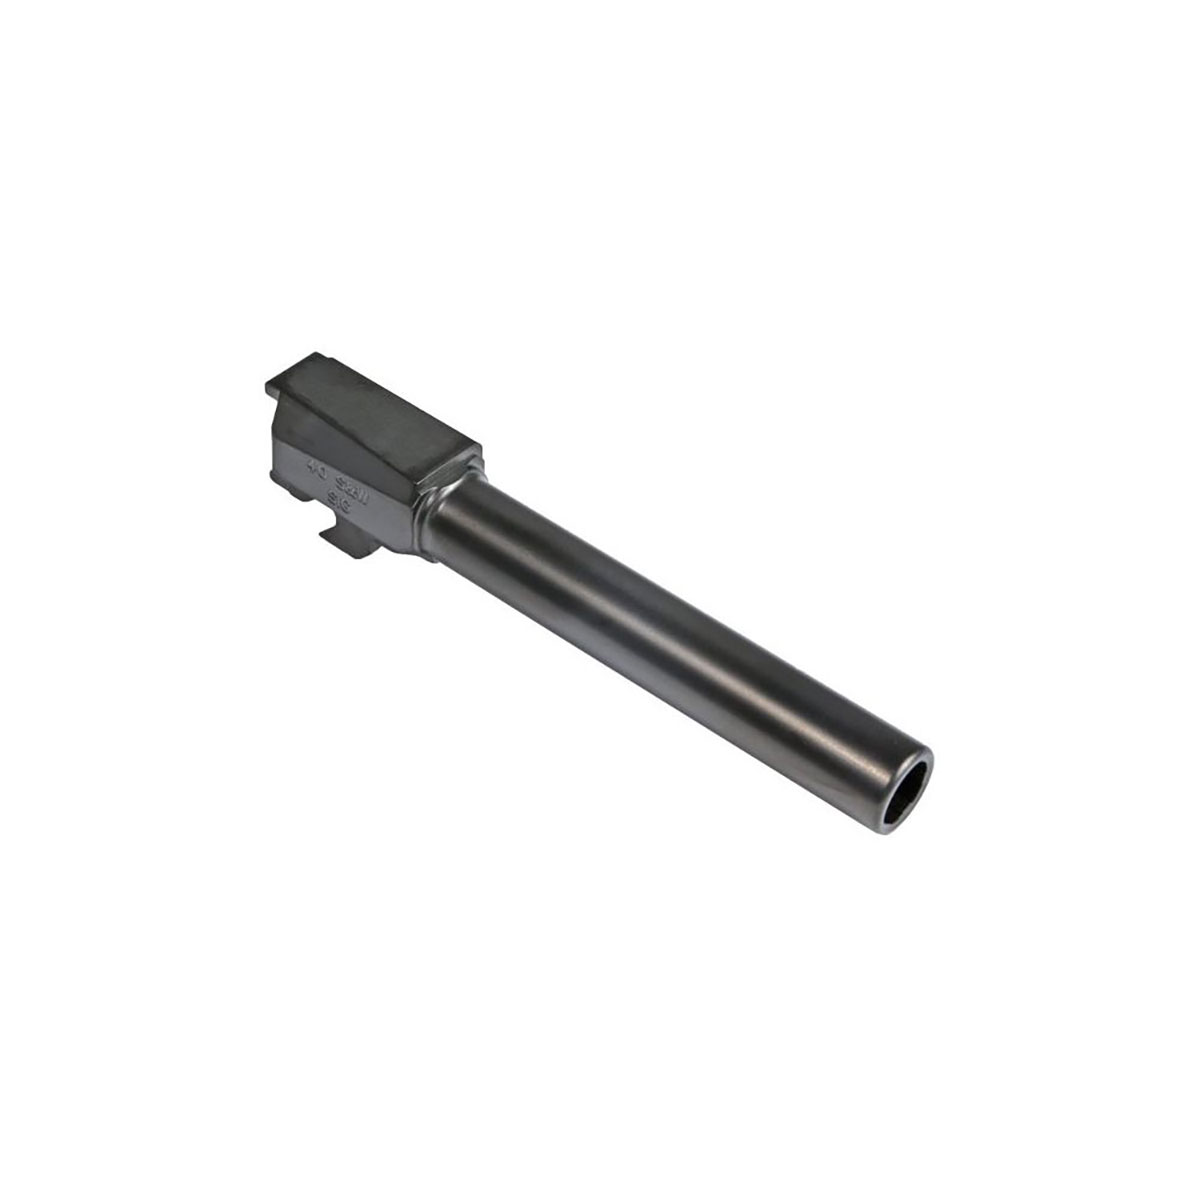 SIG SAUER, INC. - 40 S&W BARREL FOR SIG SAUER® P320 FULL SIZE